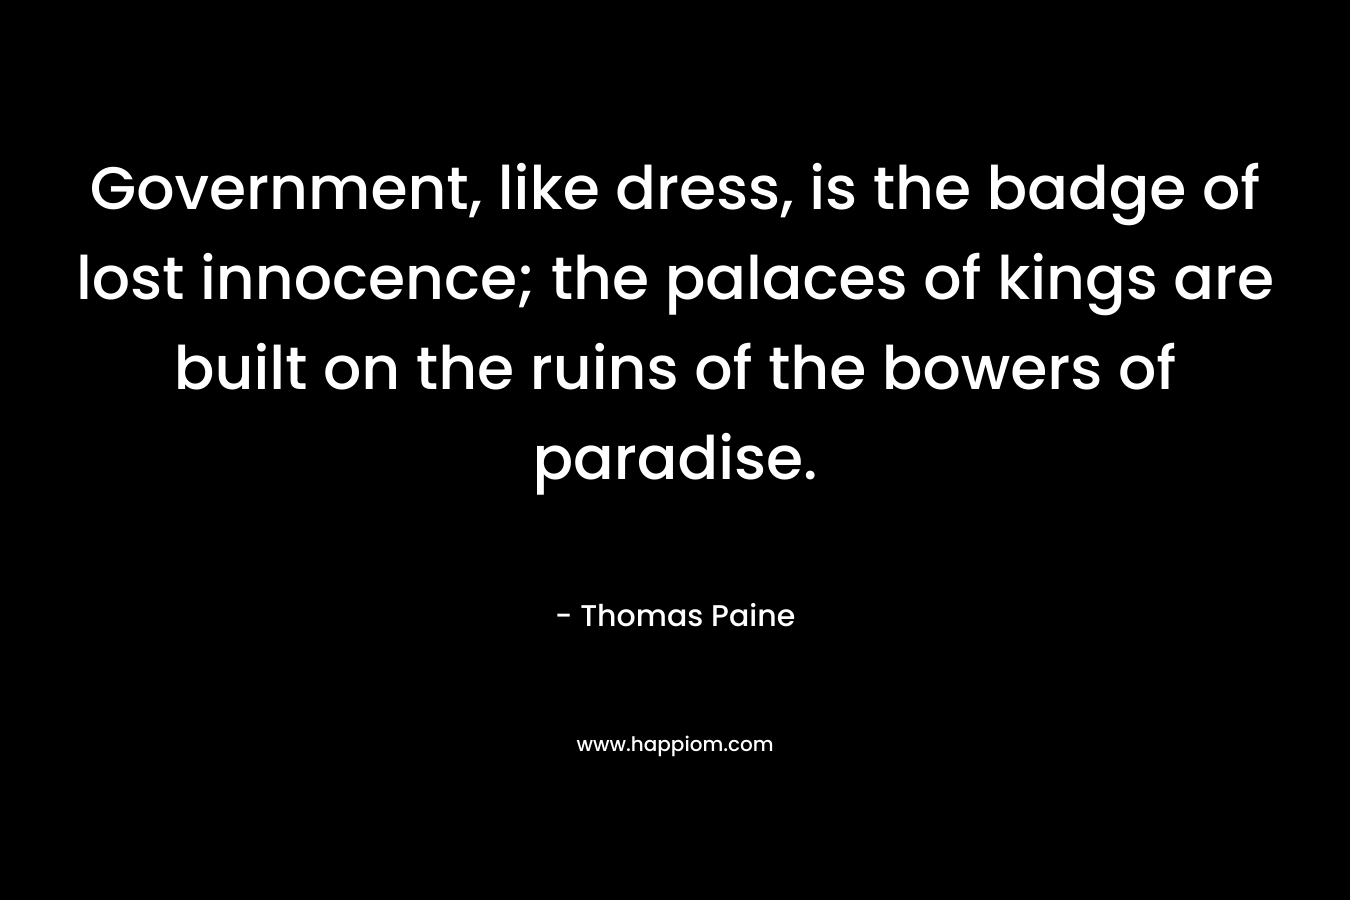 Government, like dress, is the badge of lost innocence; the palaces of kings are built on the ruins of the bowers of paradise. – Thomas Paine